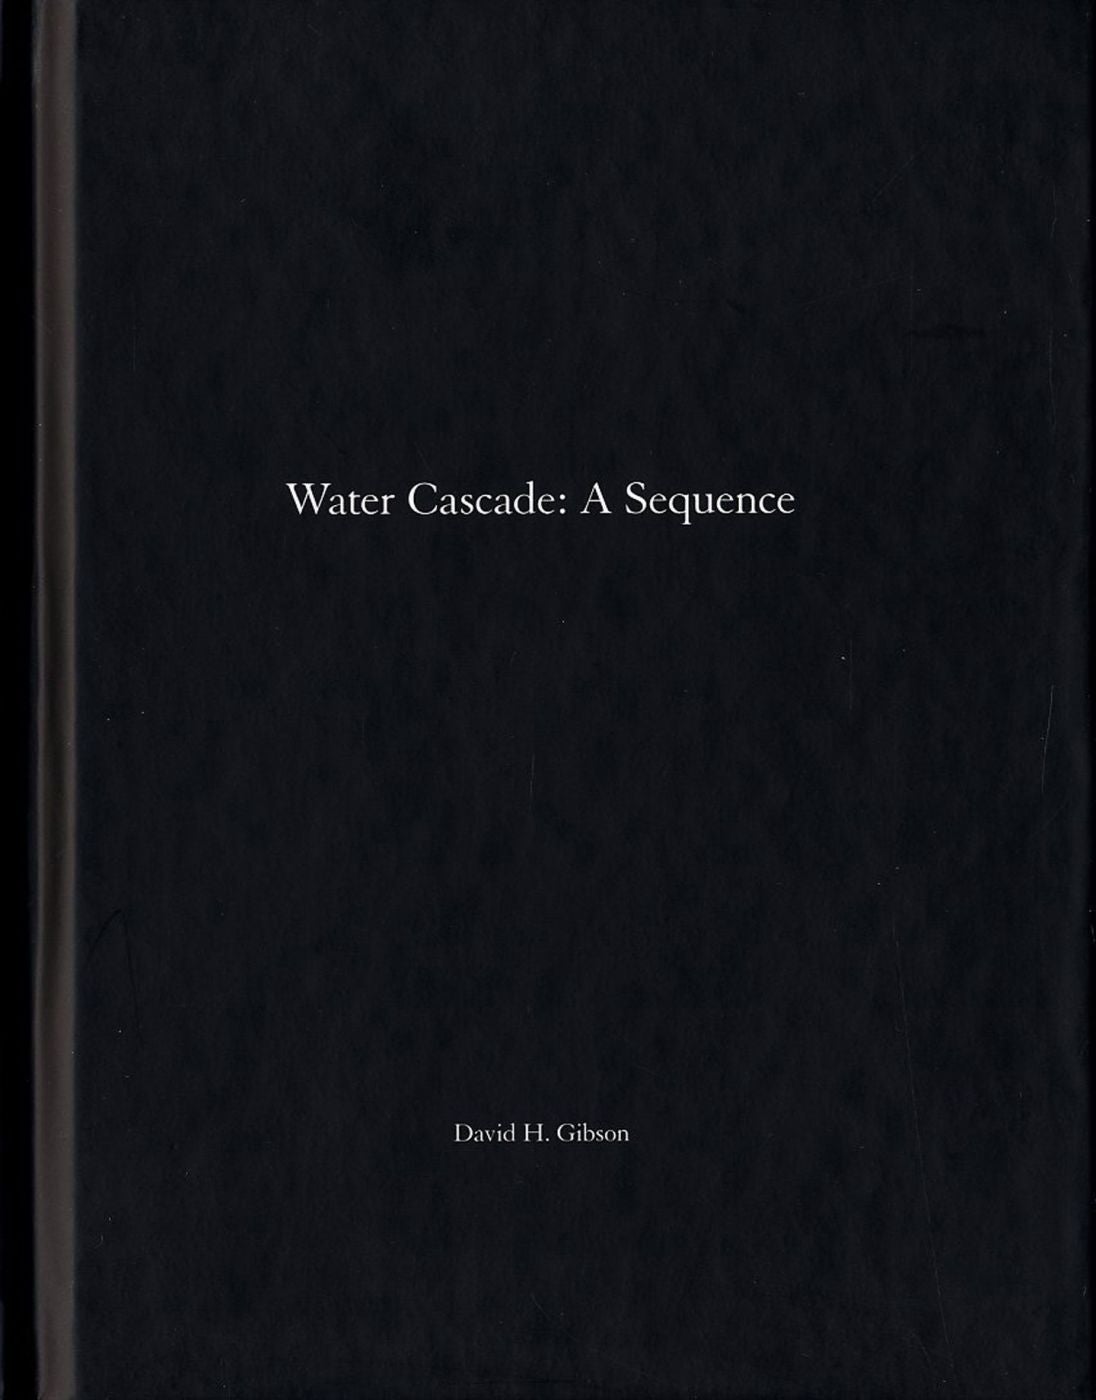 David H. Gibson: Water Cascade: A Sequence (One Picture Book #61), Limited Edition (with Print)